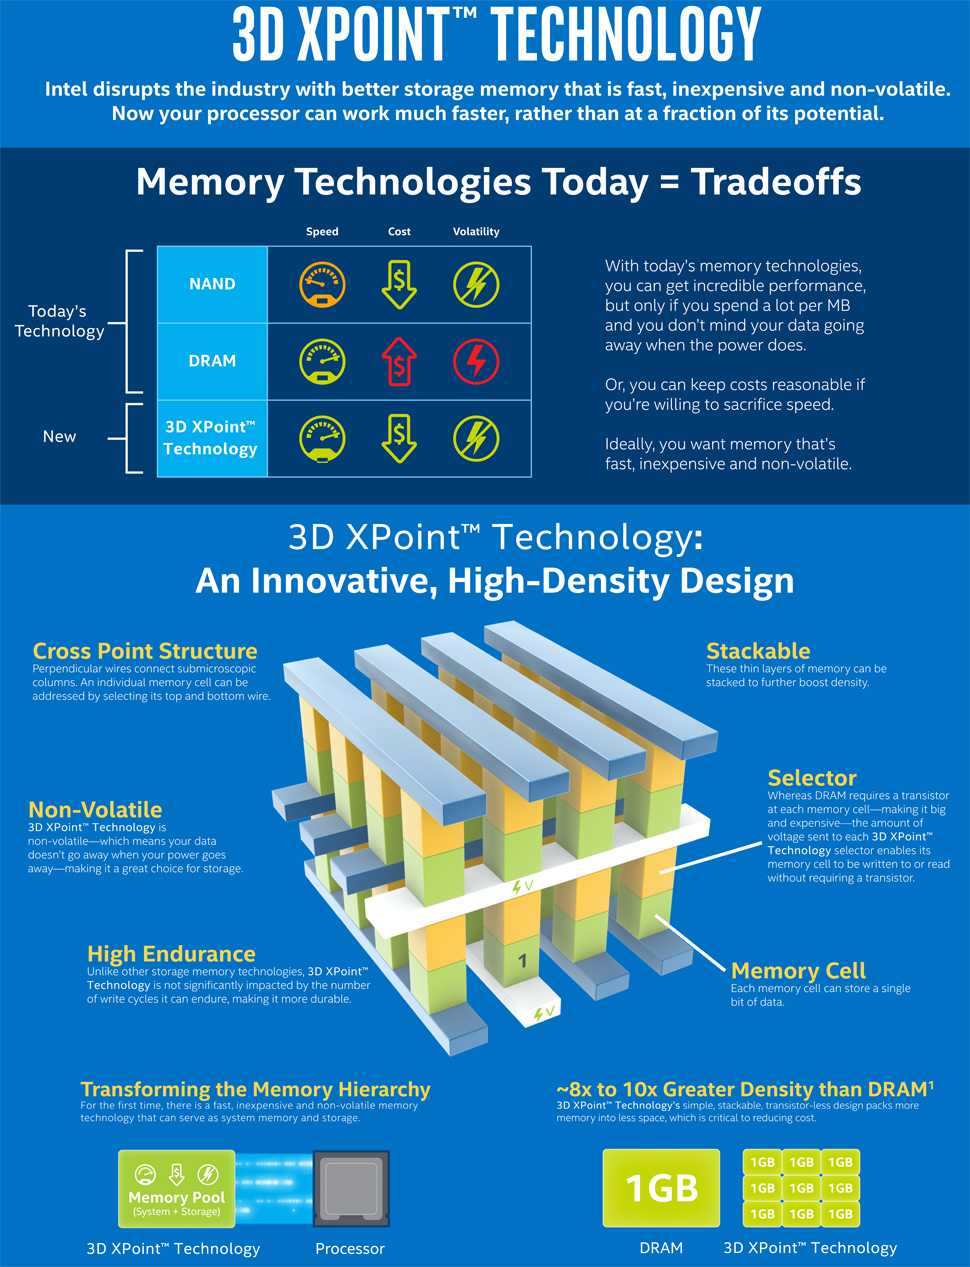 3dxpoint memory technology 2015 future timeline